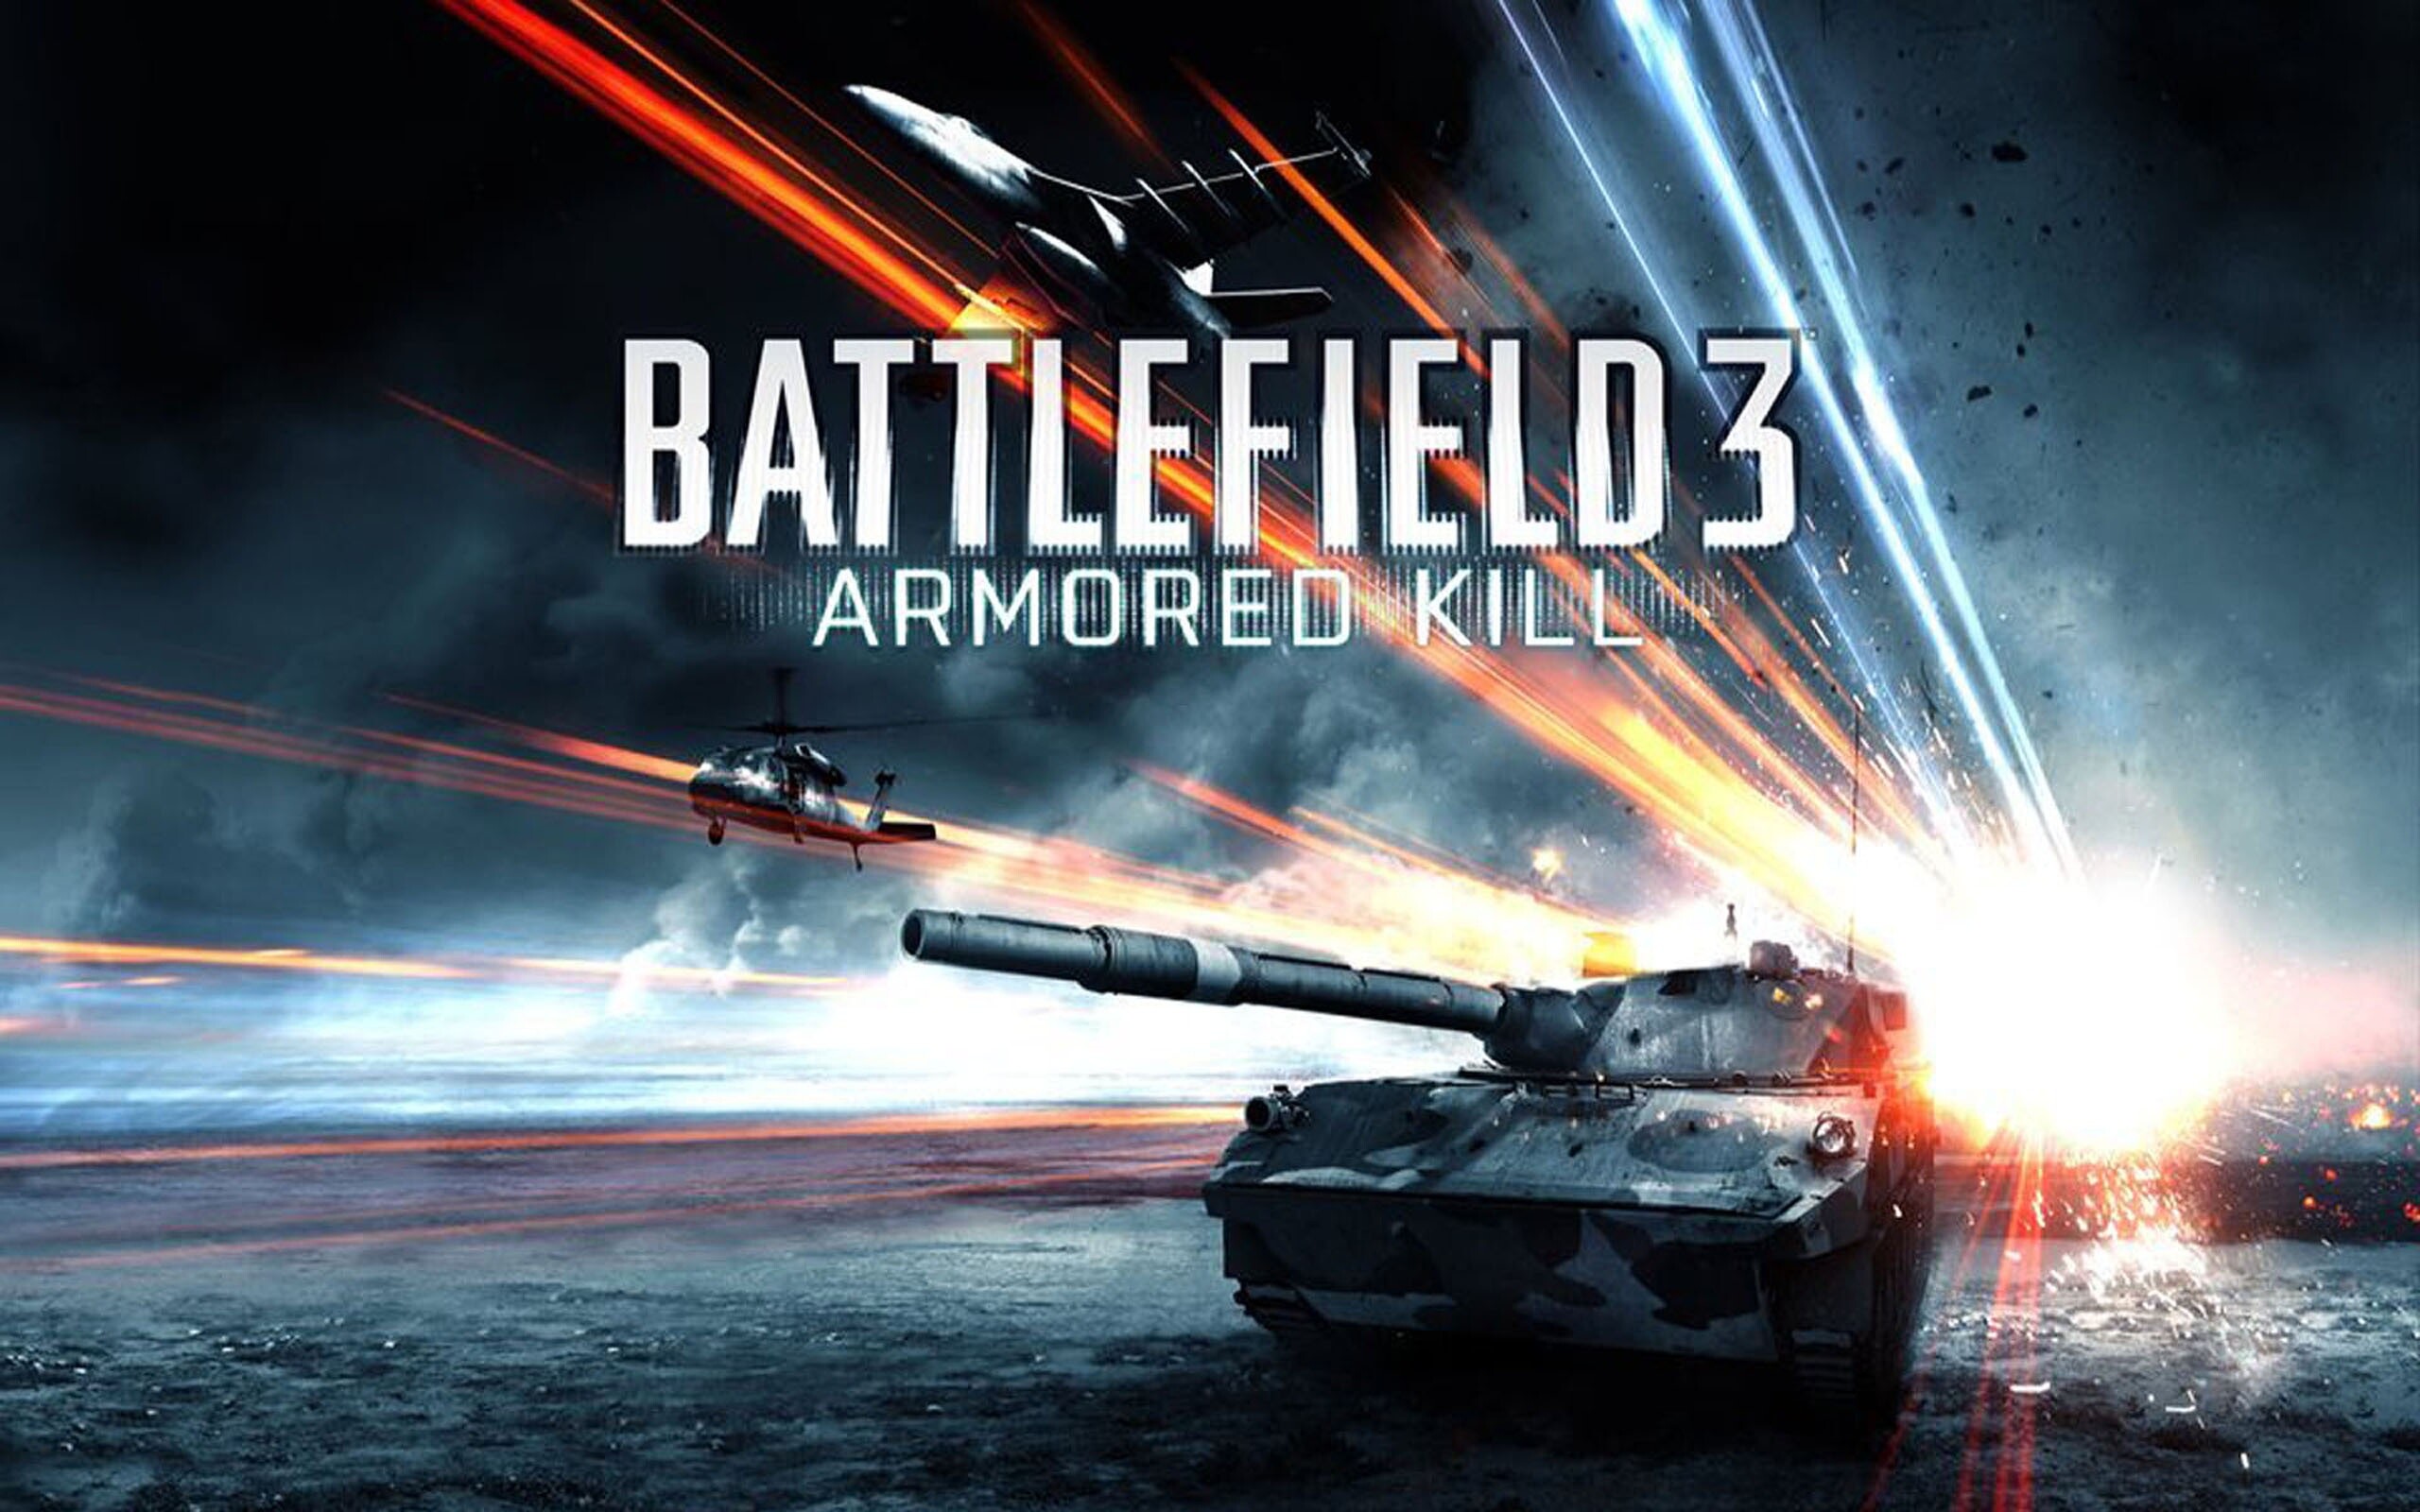 Battlefield 3: Armored Kill, The third expansion pack available for BF3. 2560x1600 HD Wallpaper.